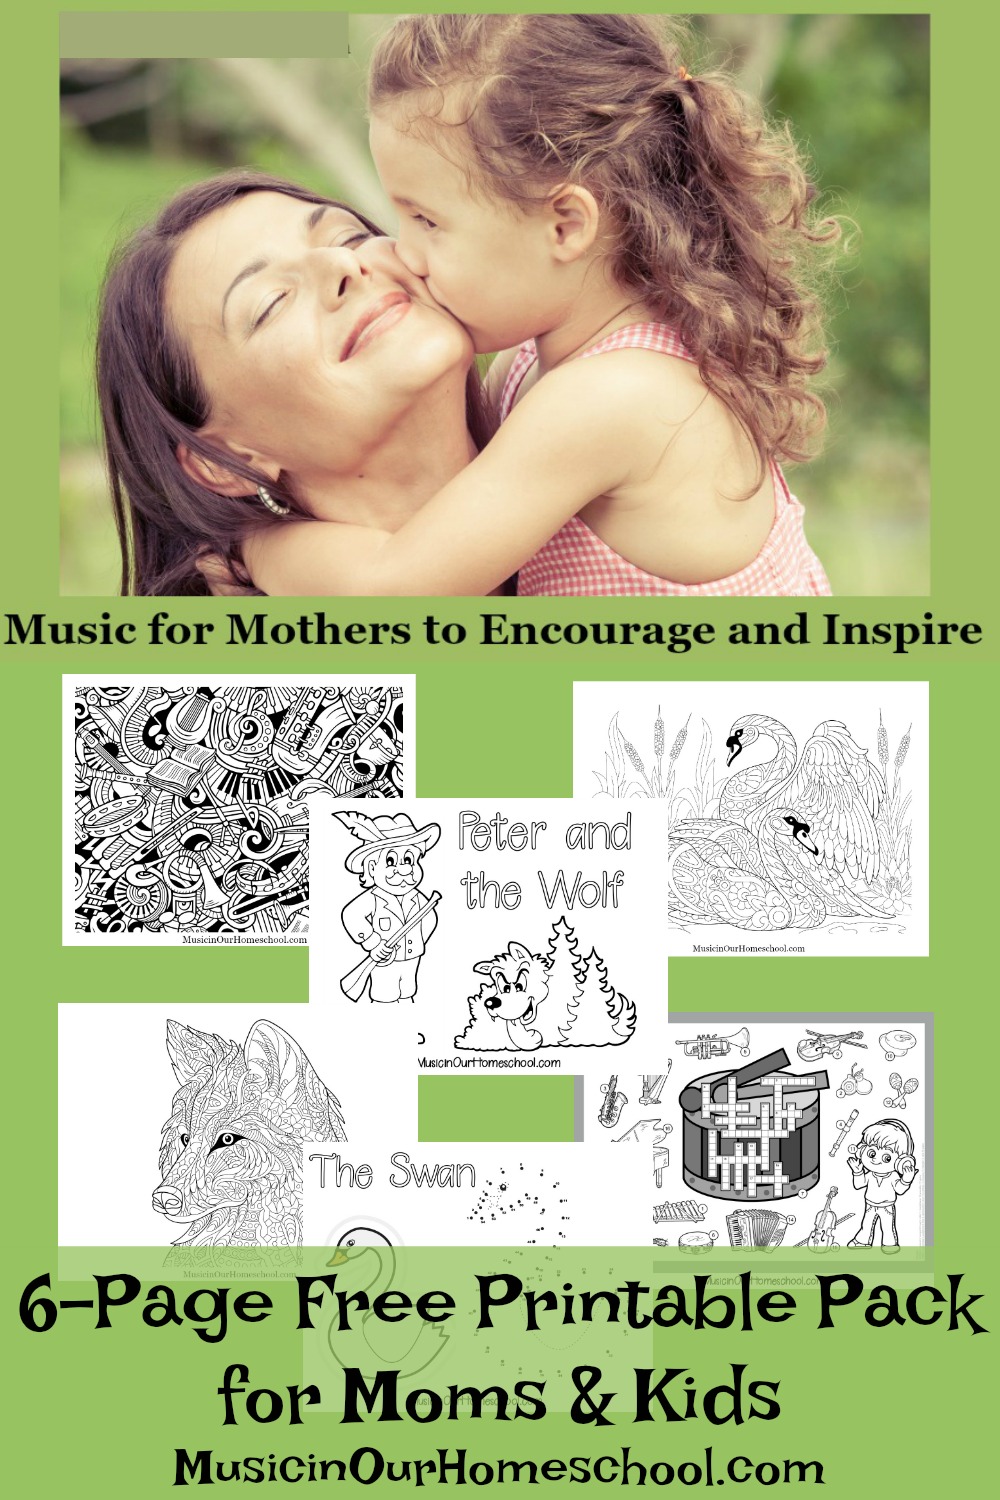 Music for Mothers to Encourage and Inspire free 6-page printable pack for moms and kids.